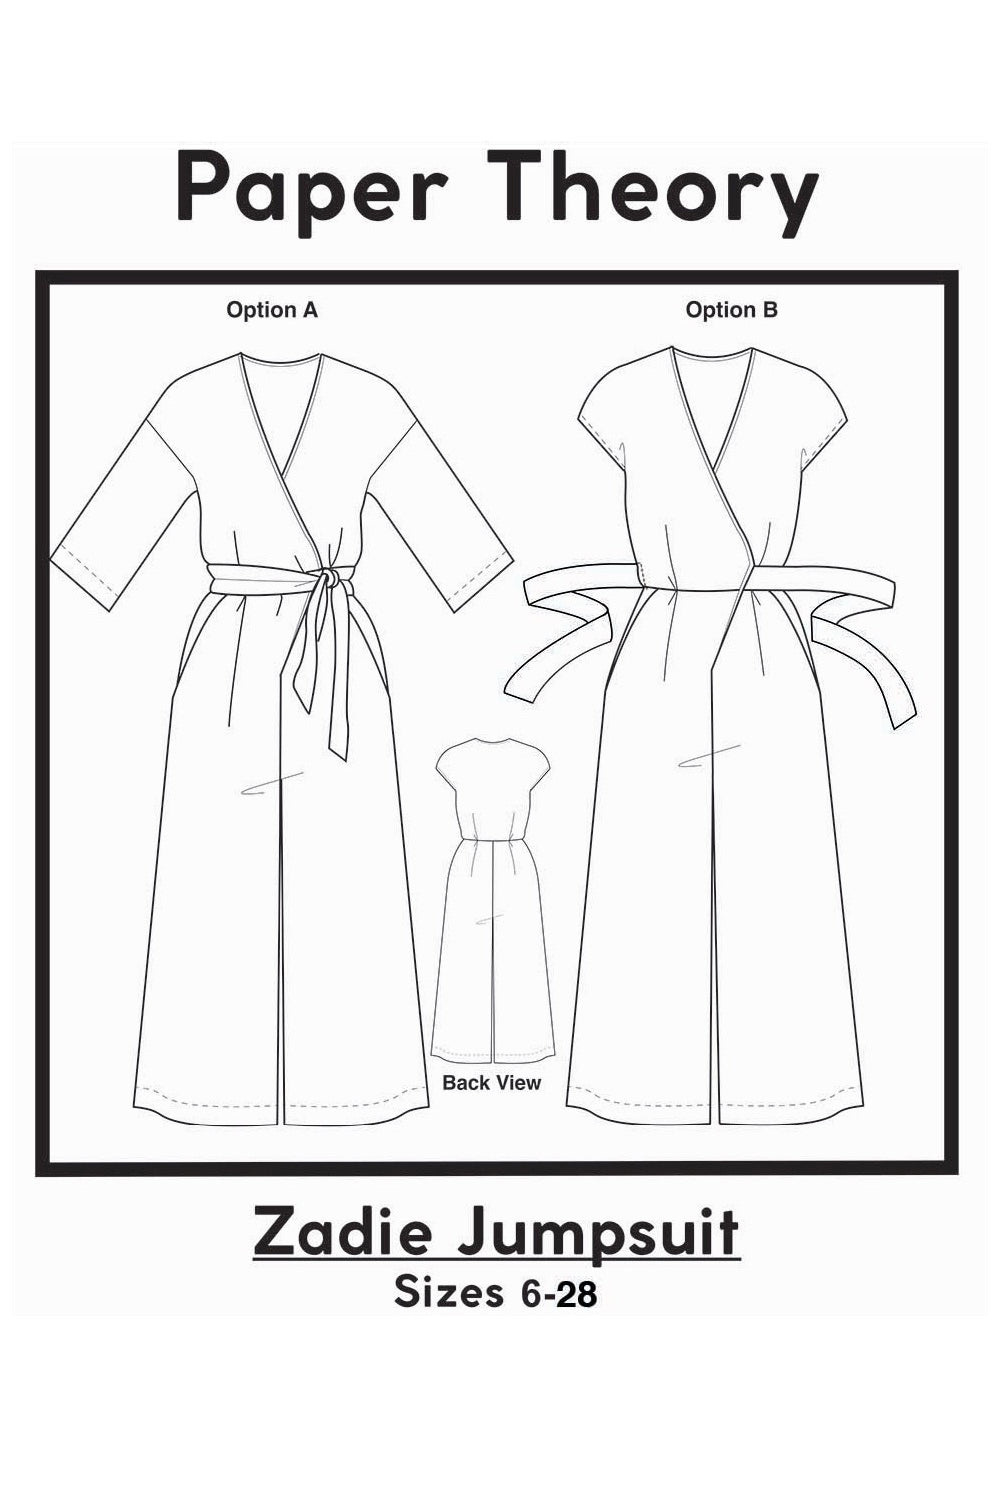 Paper Theory Paper Theory Zadie Jumpsuit Pattern